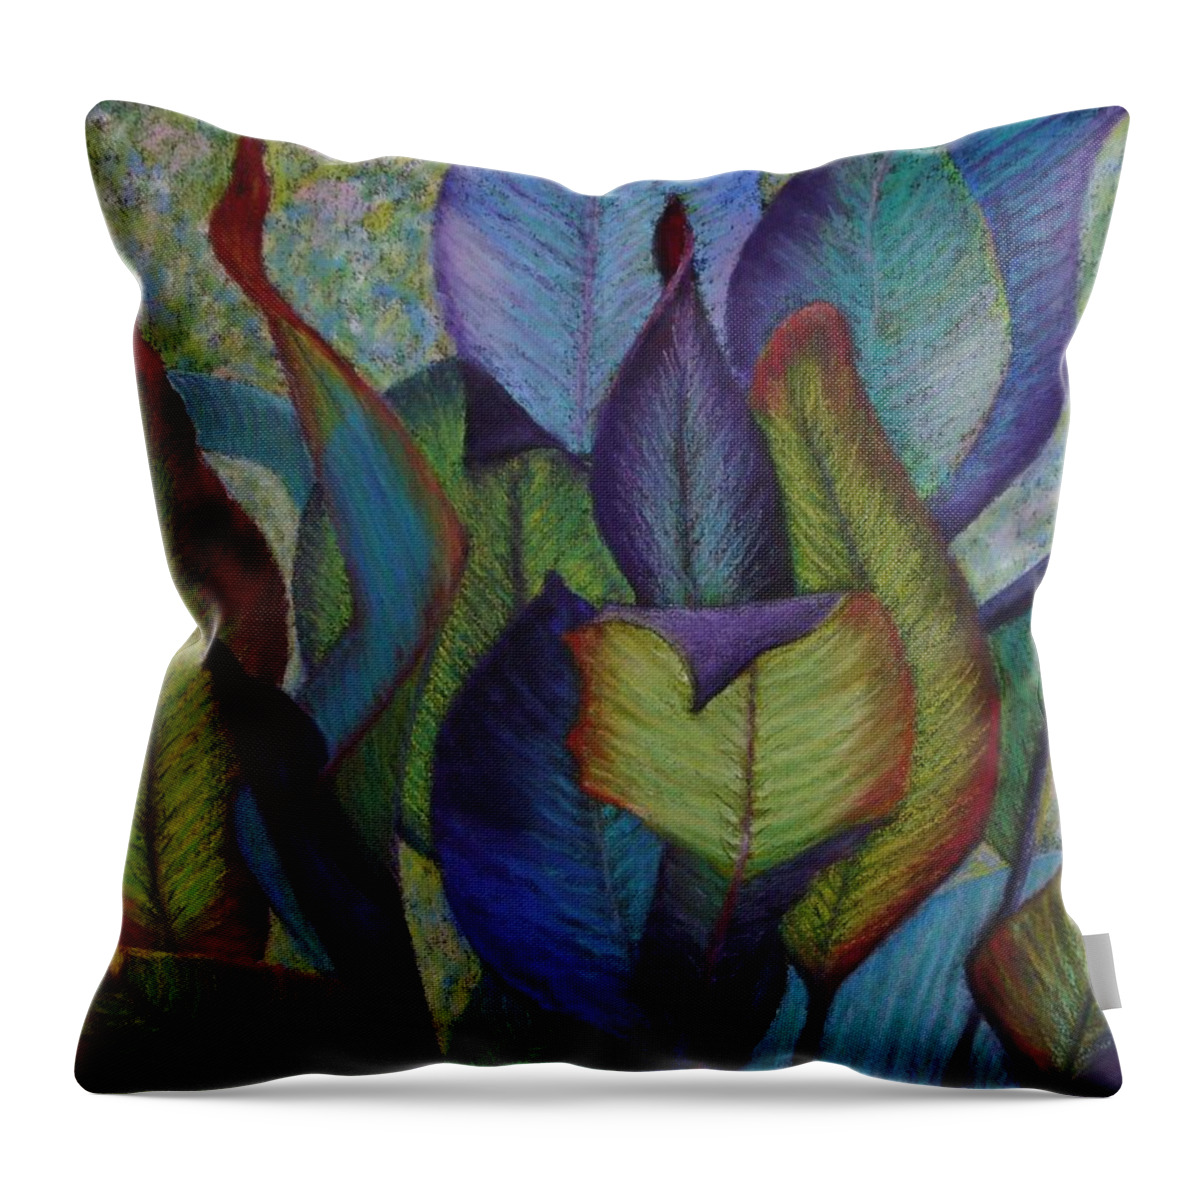 Blue Throw Pillow featuring the painting Cannas by Lynda Evans